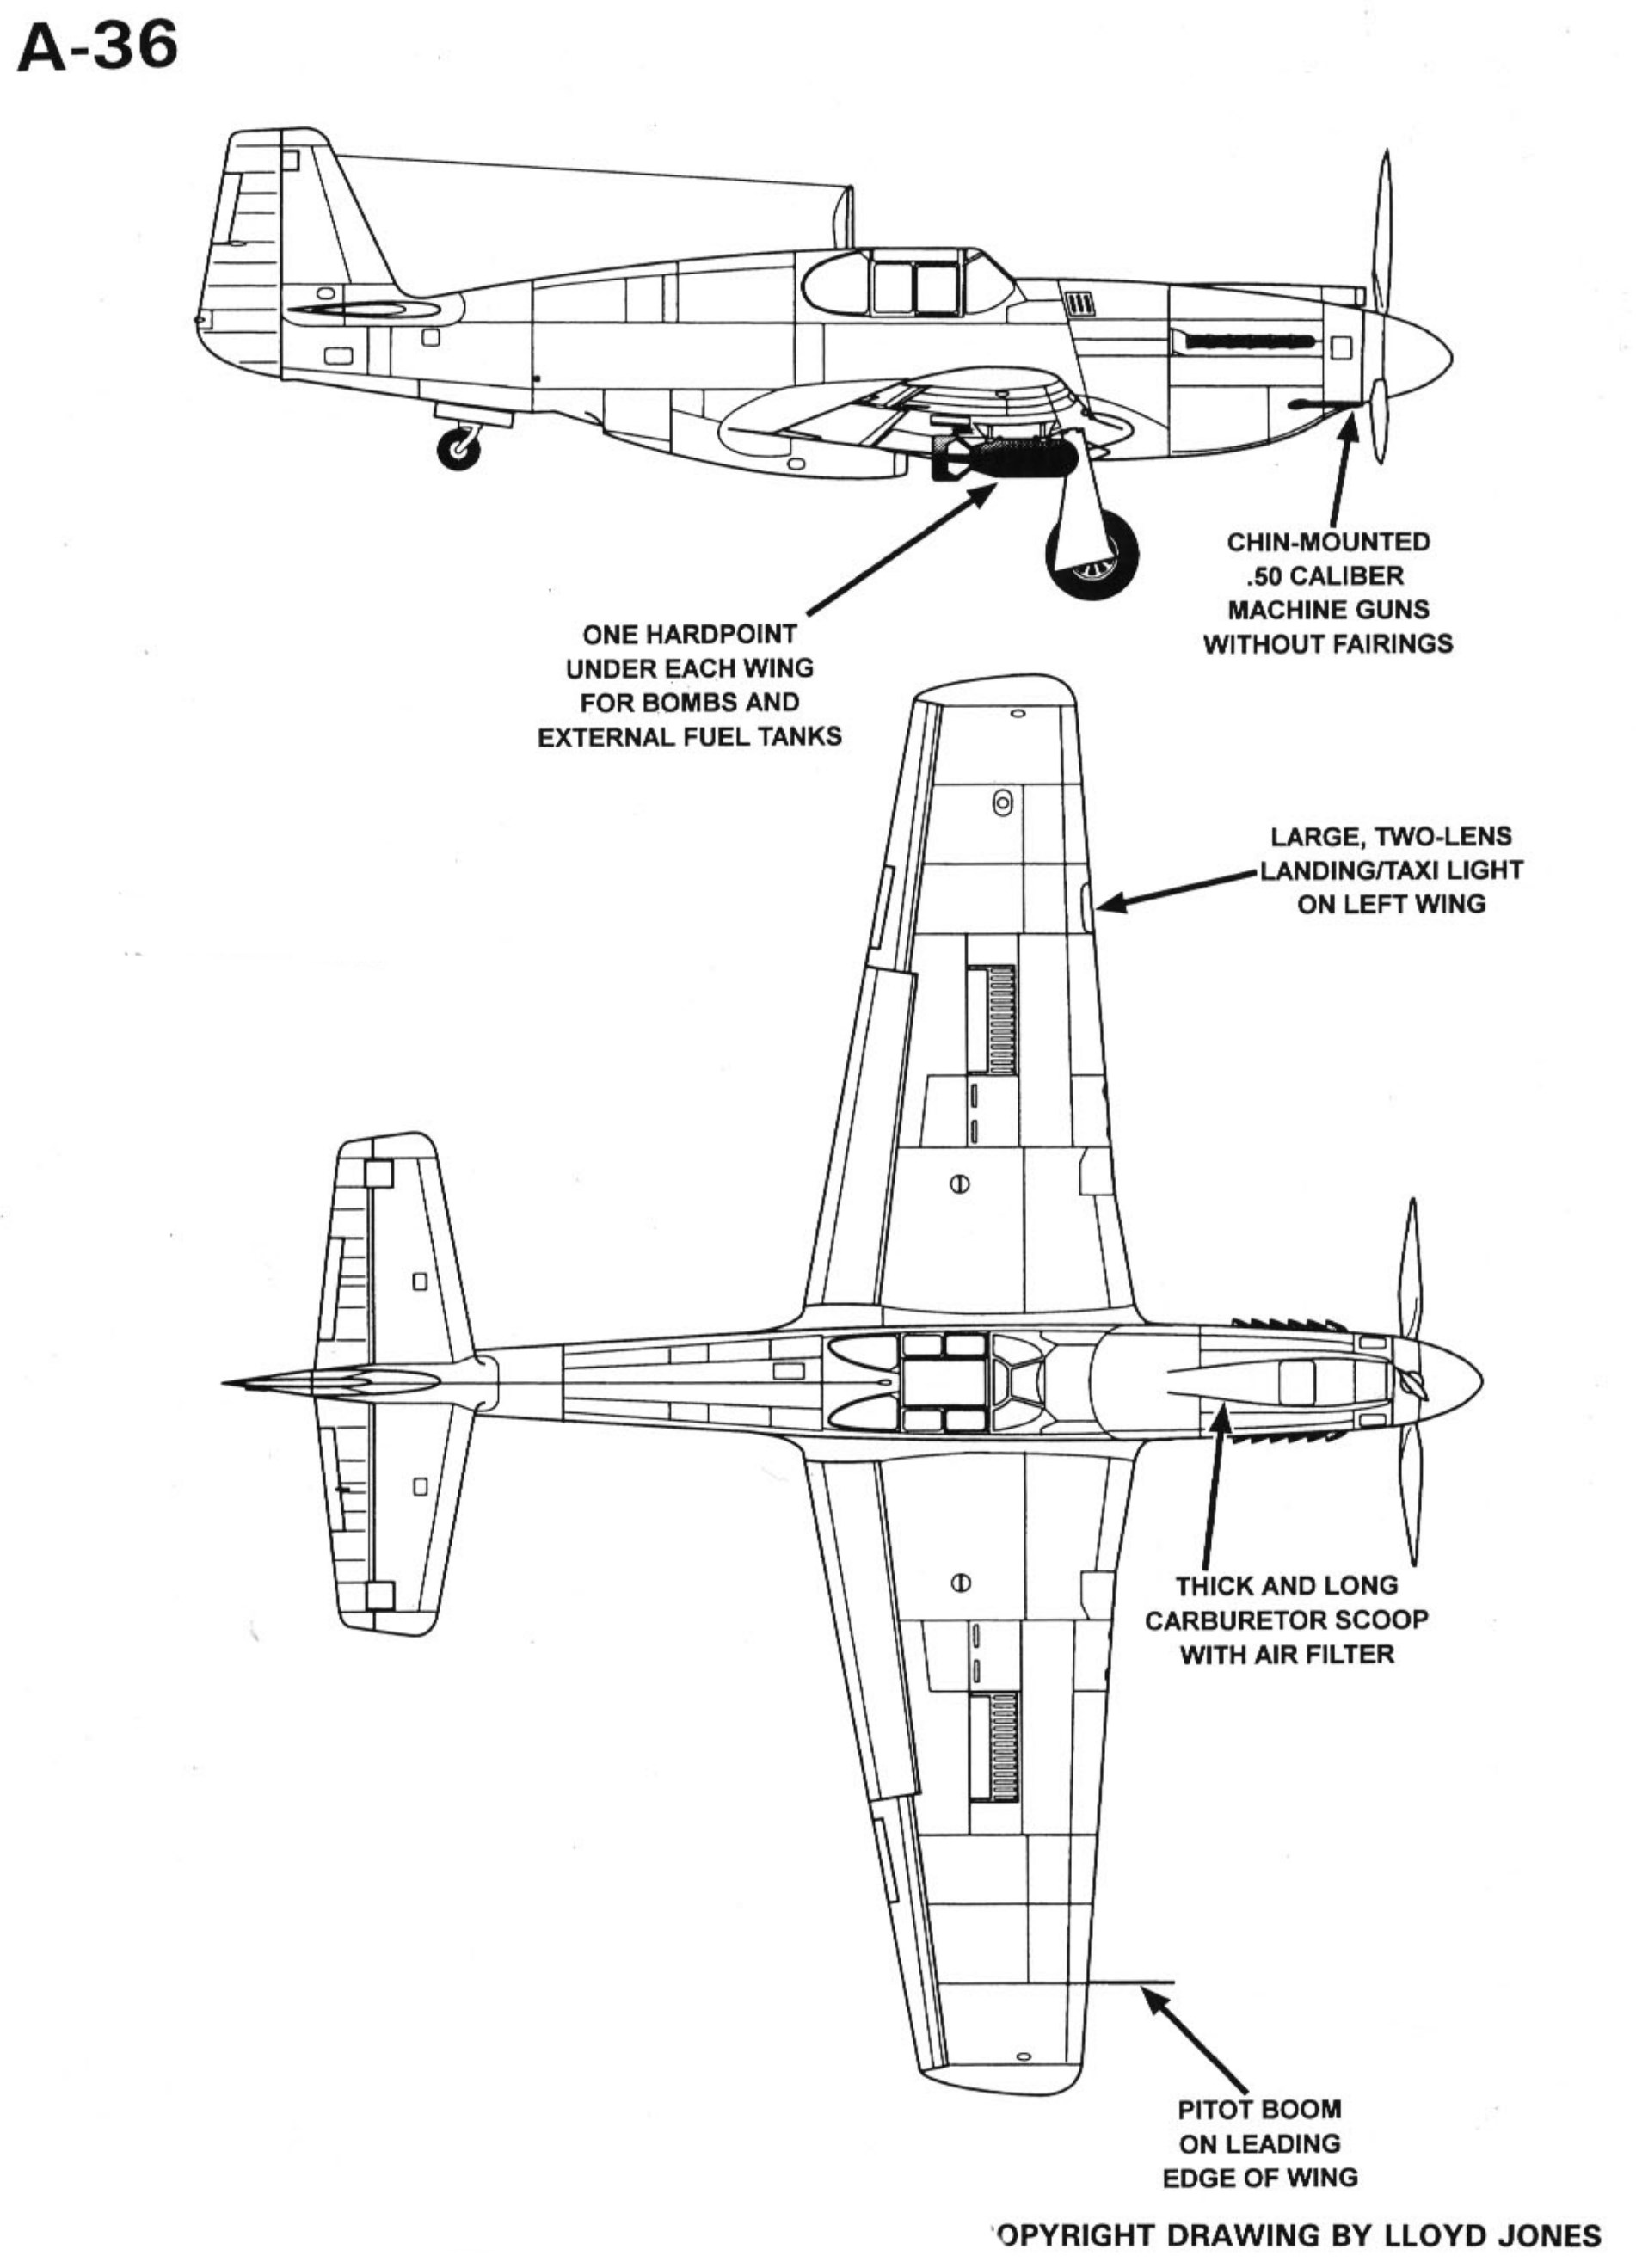 1706450032 662 THE A 36 MUSTANG